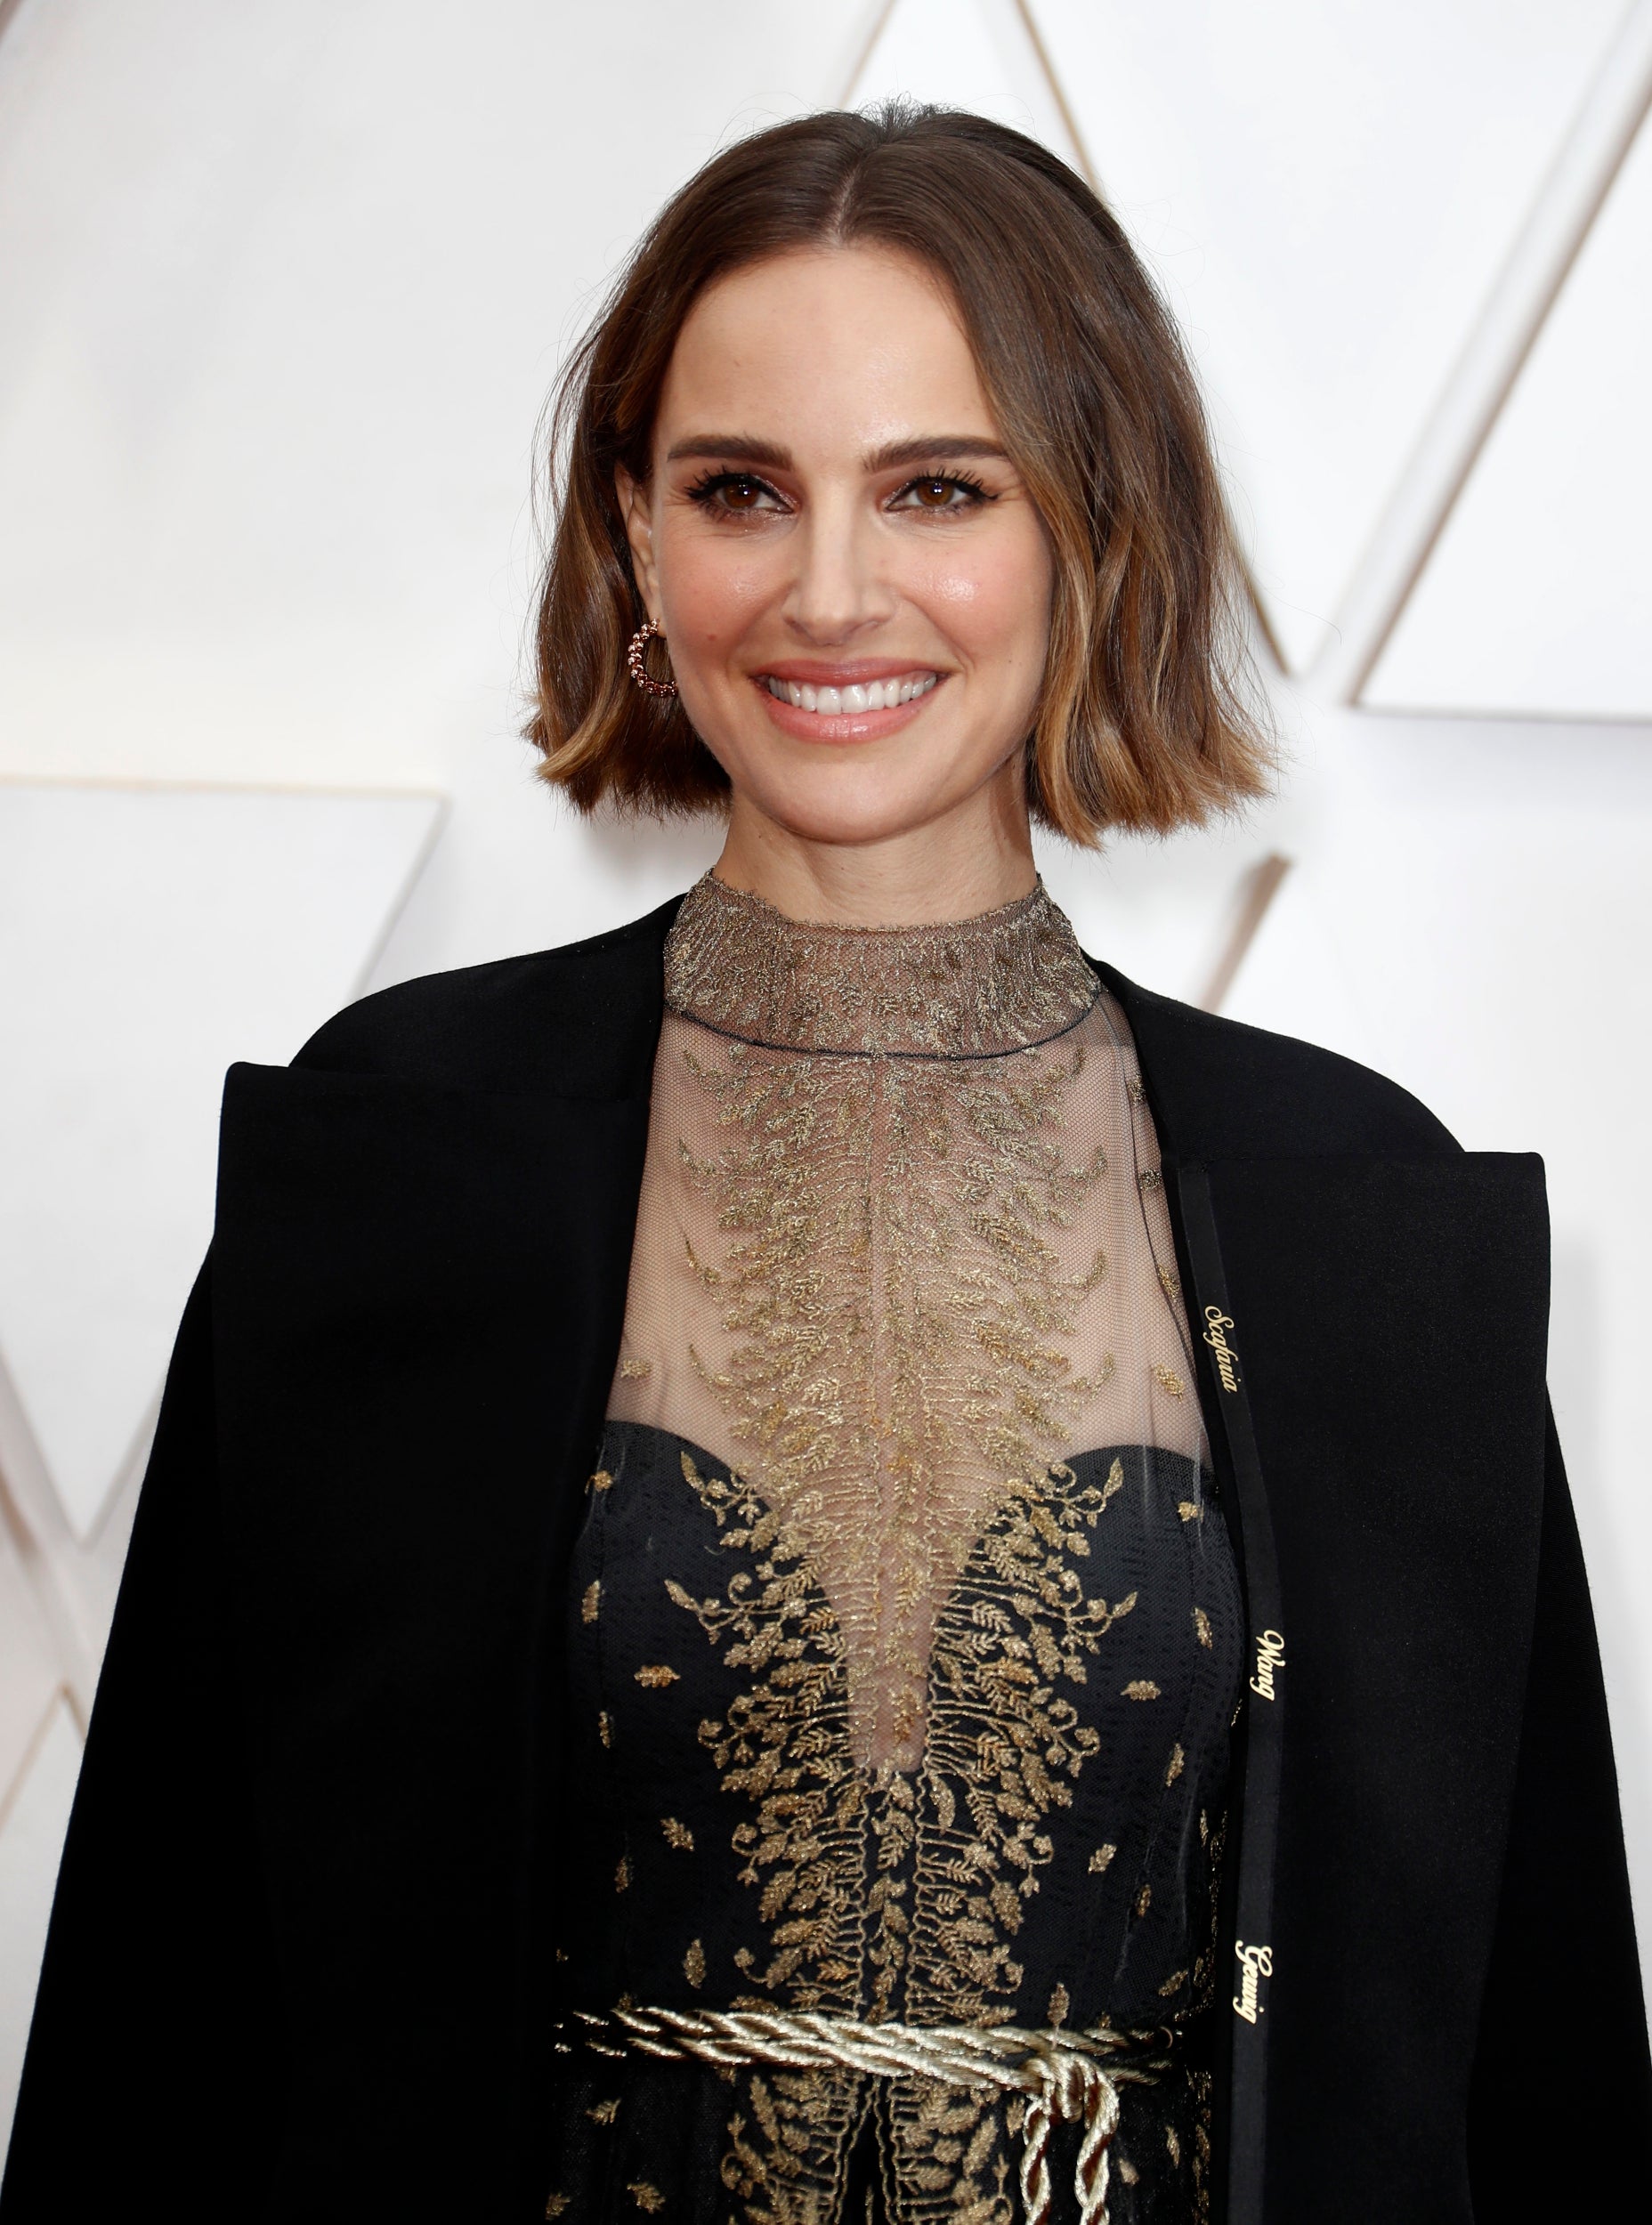 Natalie Portman's cape was embroidered with the names of female directors who had not been nominated